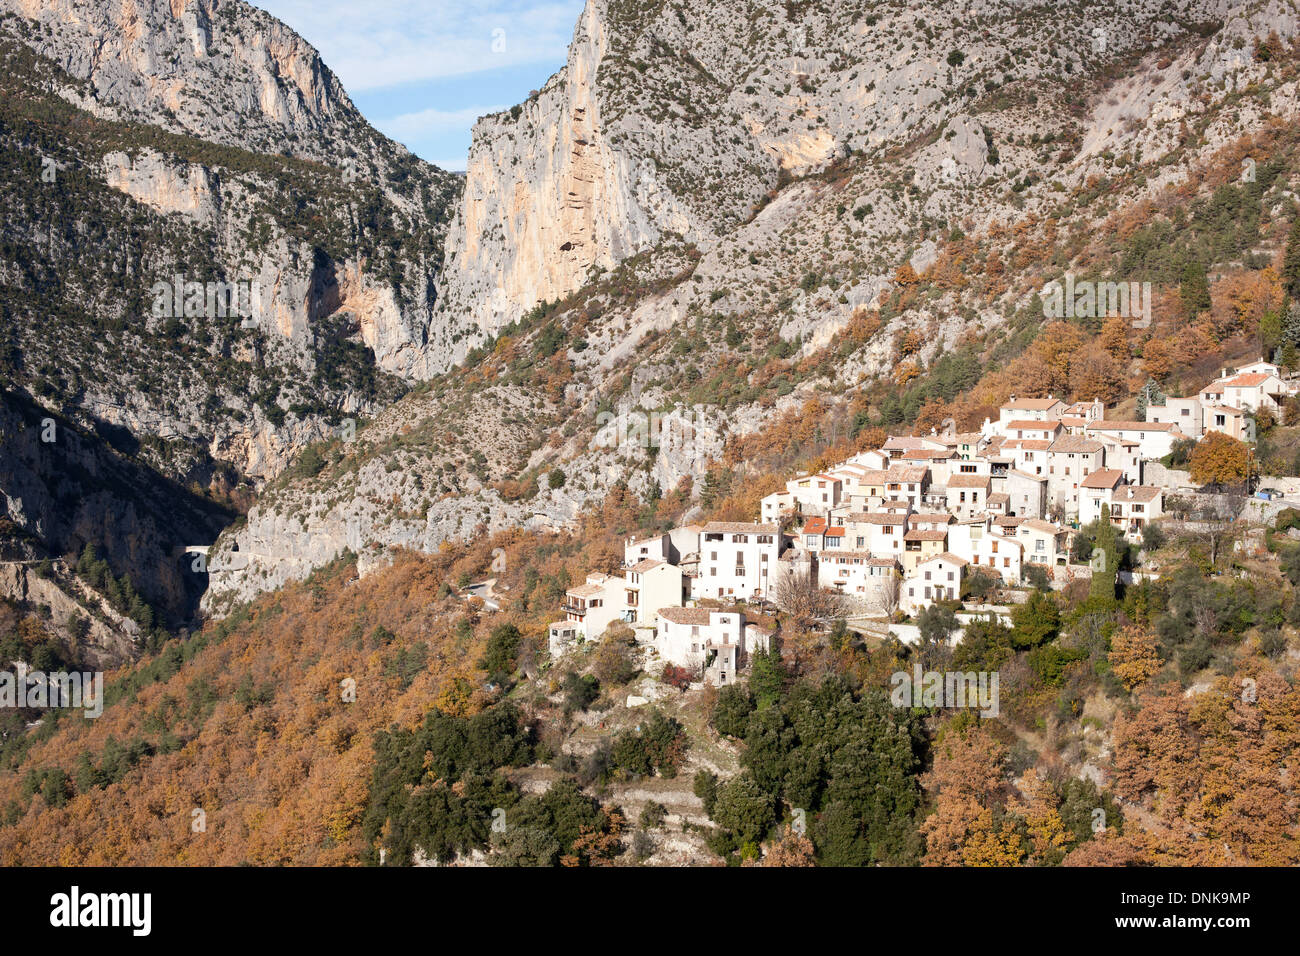 AERIAL VIEW. Perched medieval village at the entrance of a deep canyon. Aiglun, Esteron Valley, Alpes-Maritimes, French Riviera's backcountry, France. Stock Photo